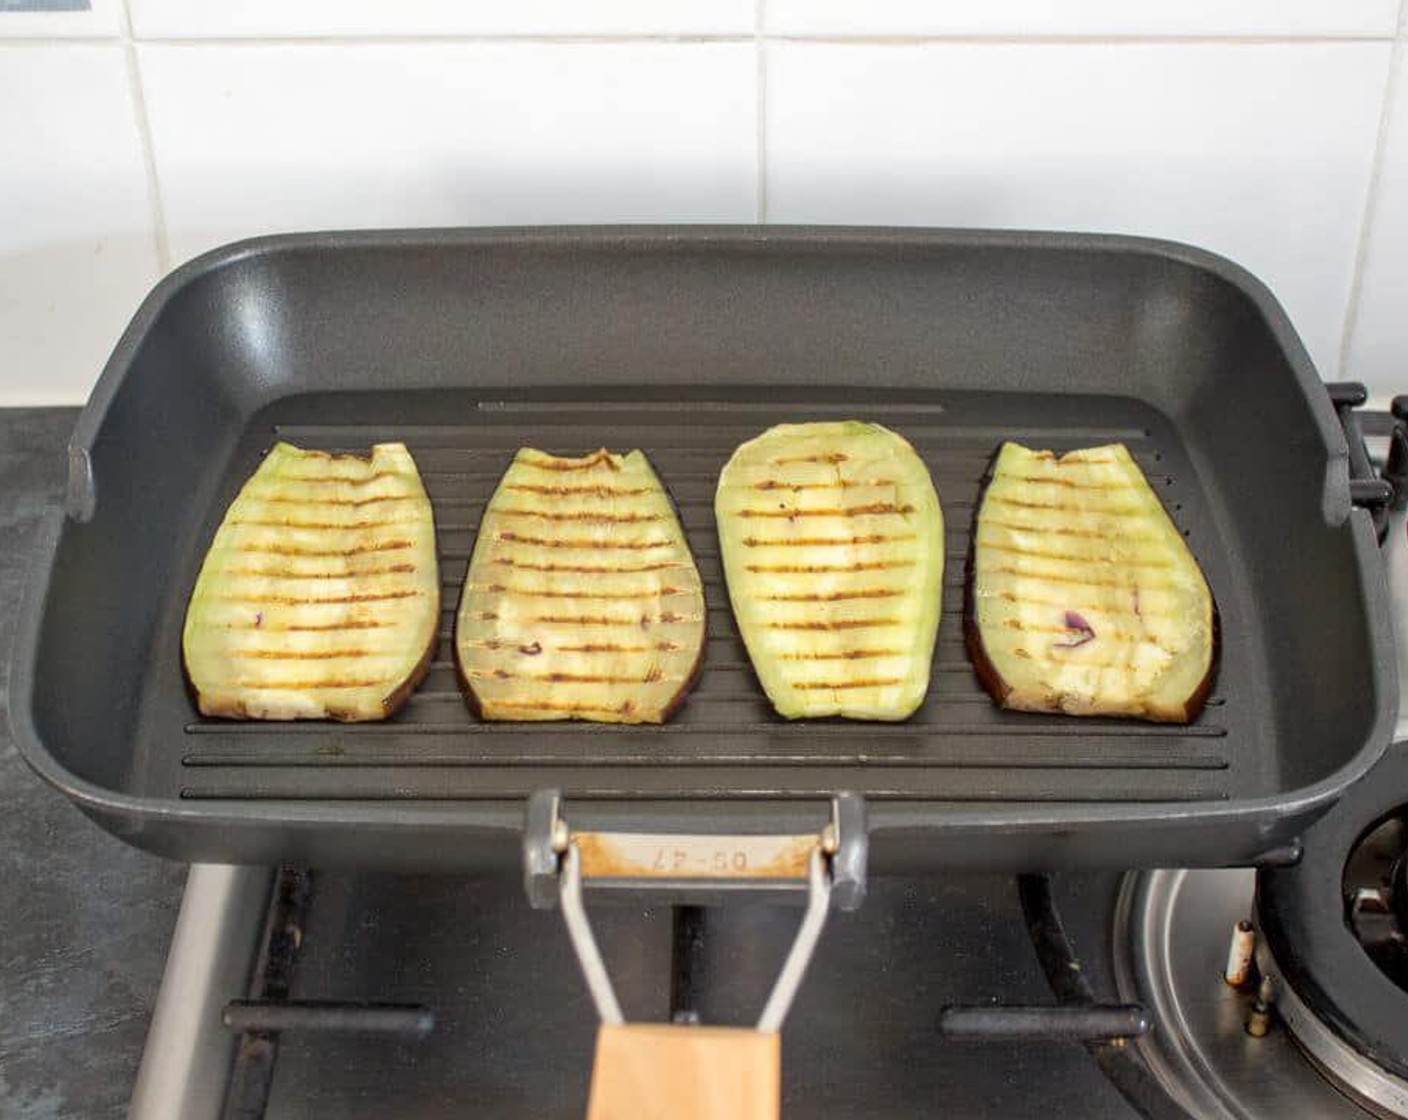 step 3 If adding Eggplant (1), heat a griddle pan over medium to high heat. Brush both sides of each slice with Olive Oil (as needed) and grill on each side until nice charred lines appear. When cooked, take out the pan and sprinkle with a little salt.